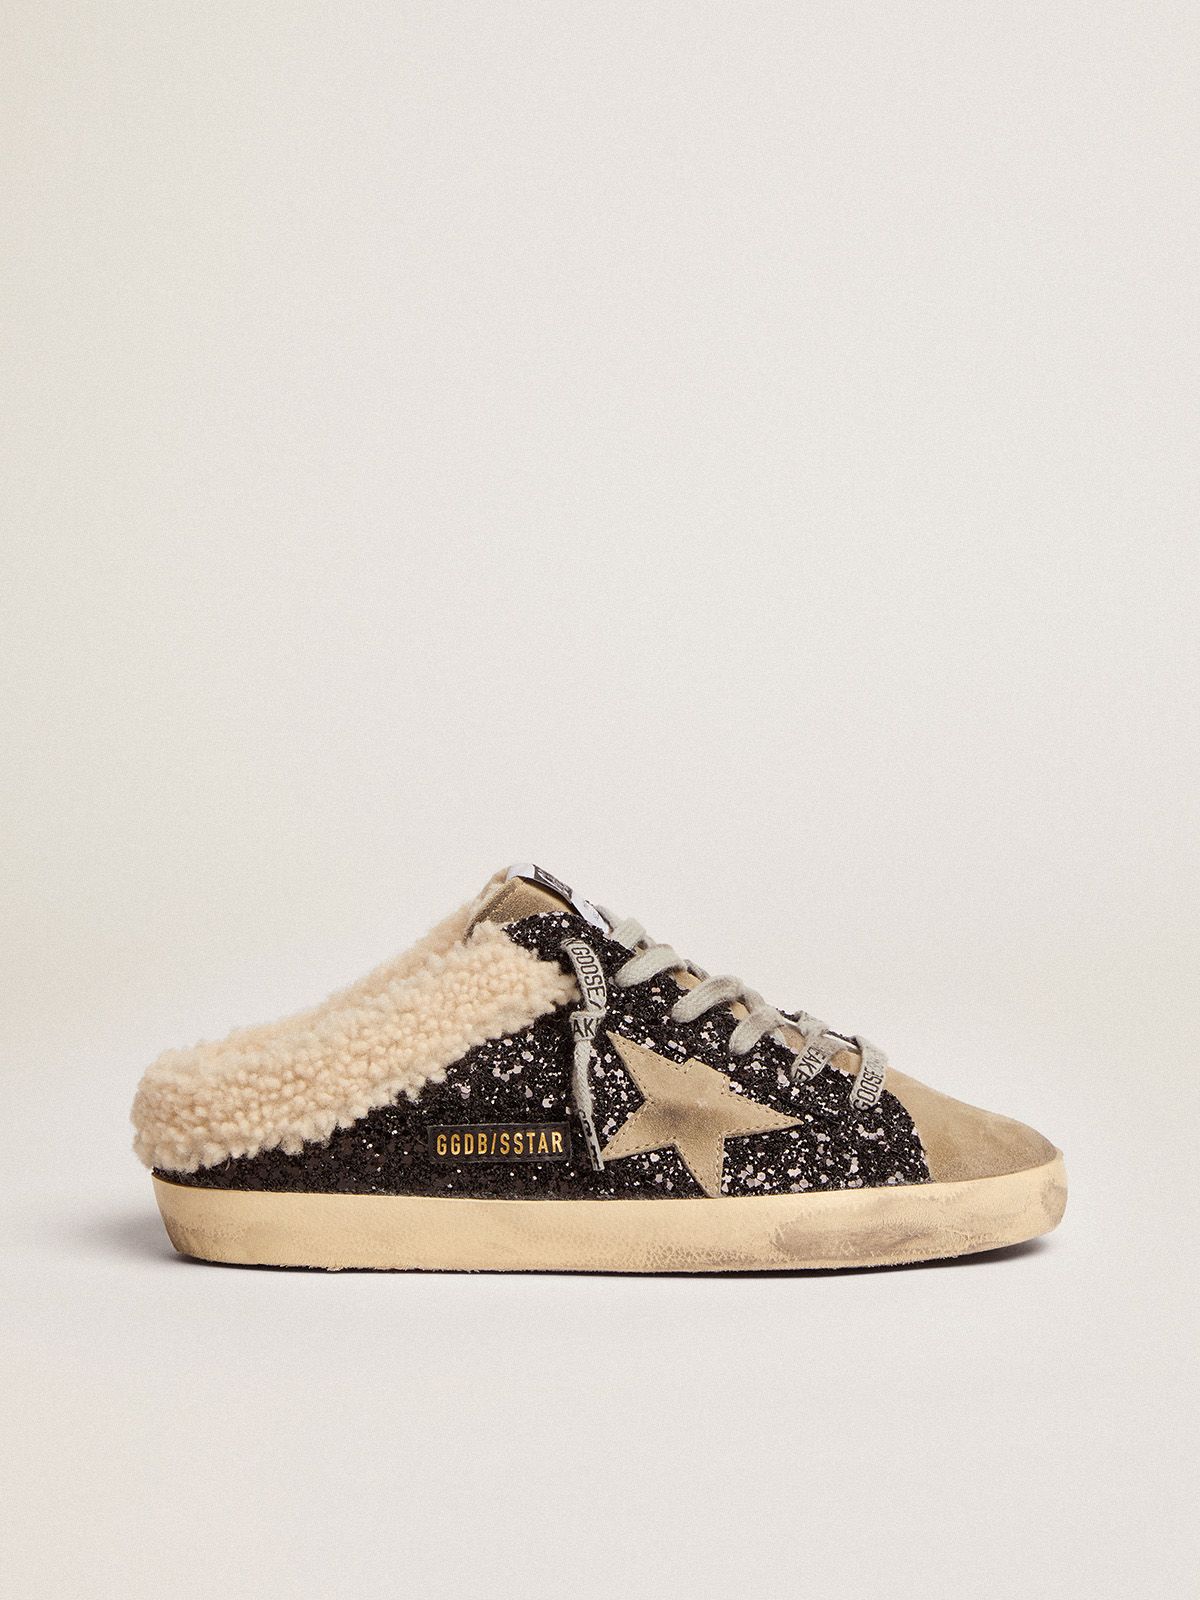 golden goose in Sabots Super-Star and LTD with shearling glitter dove-gray lining star suede black